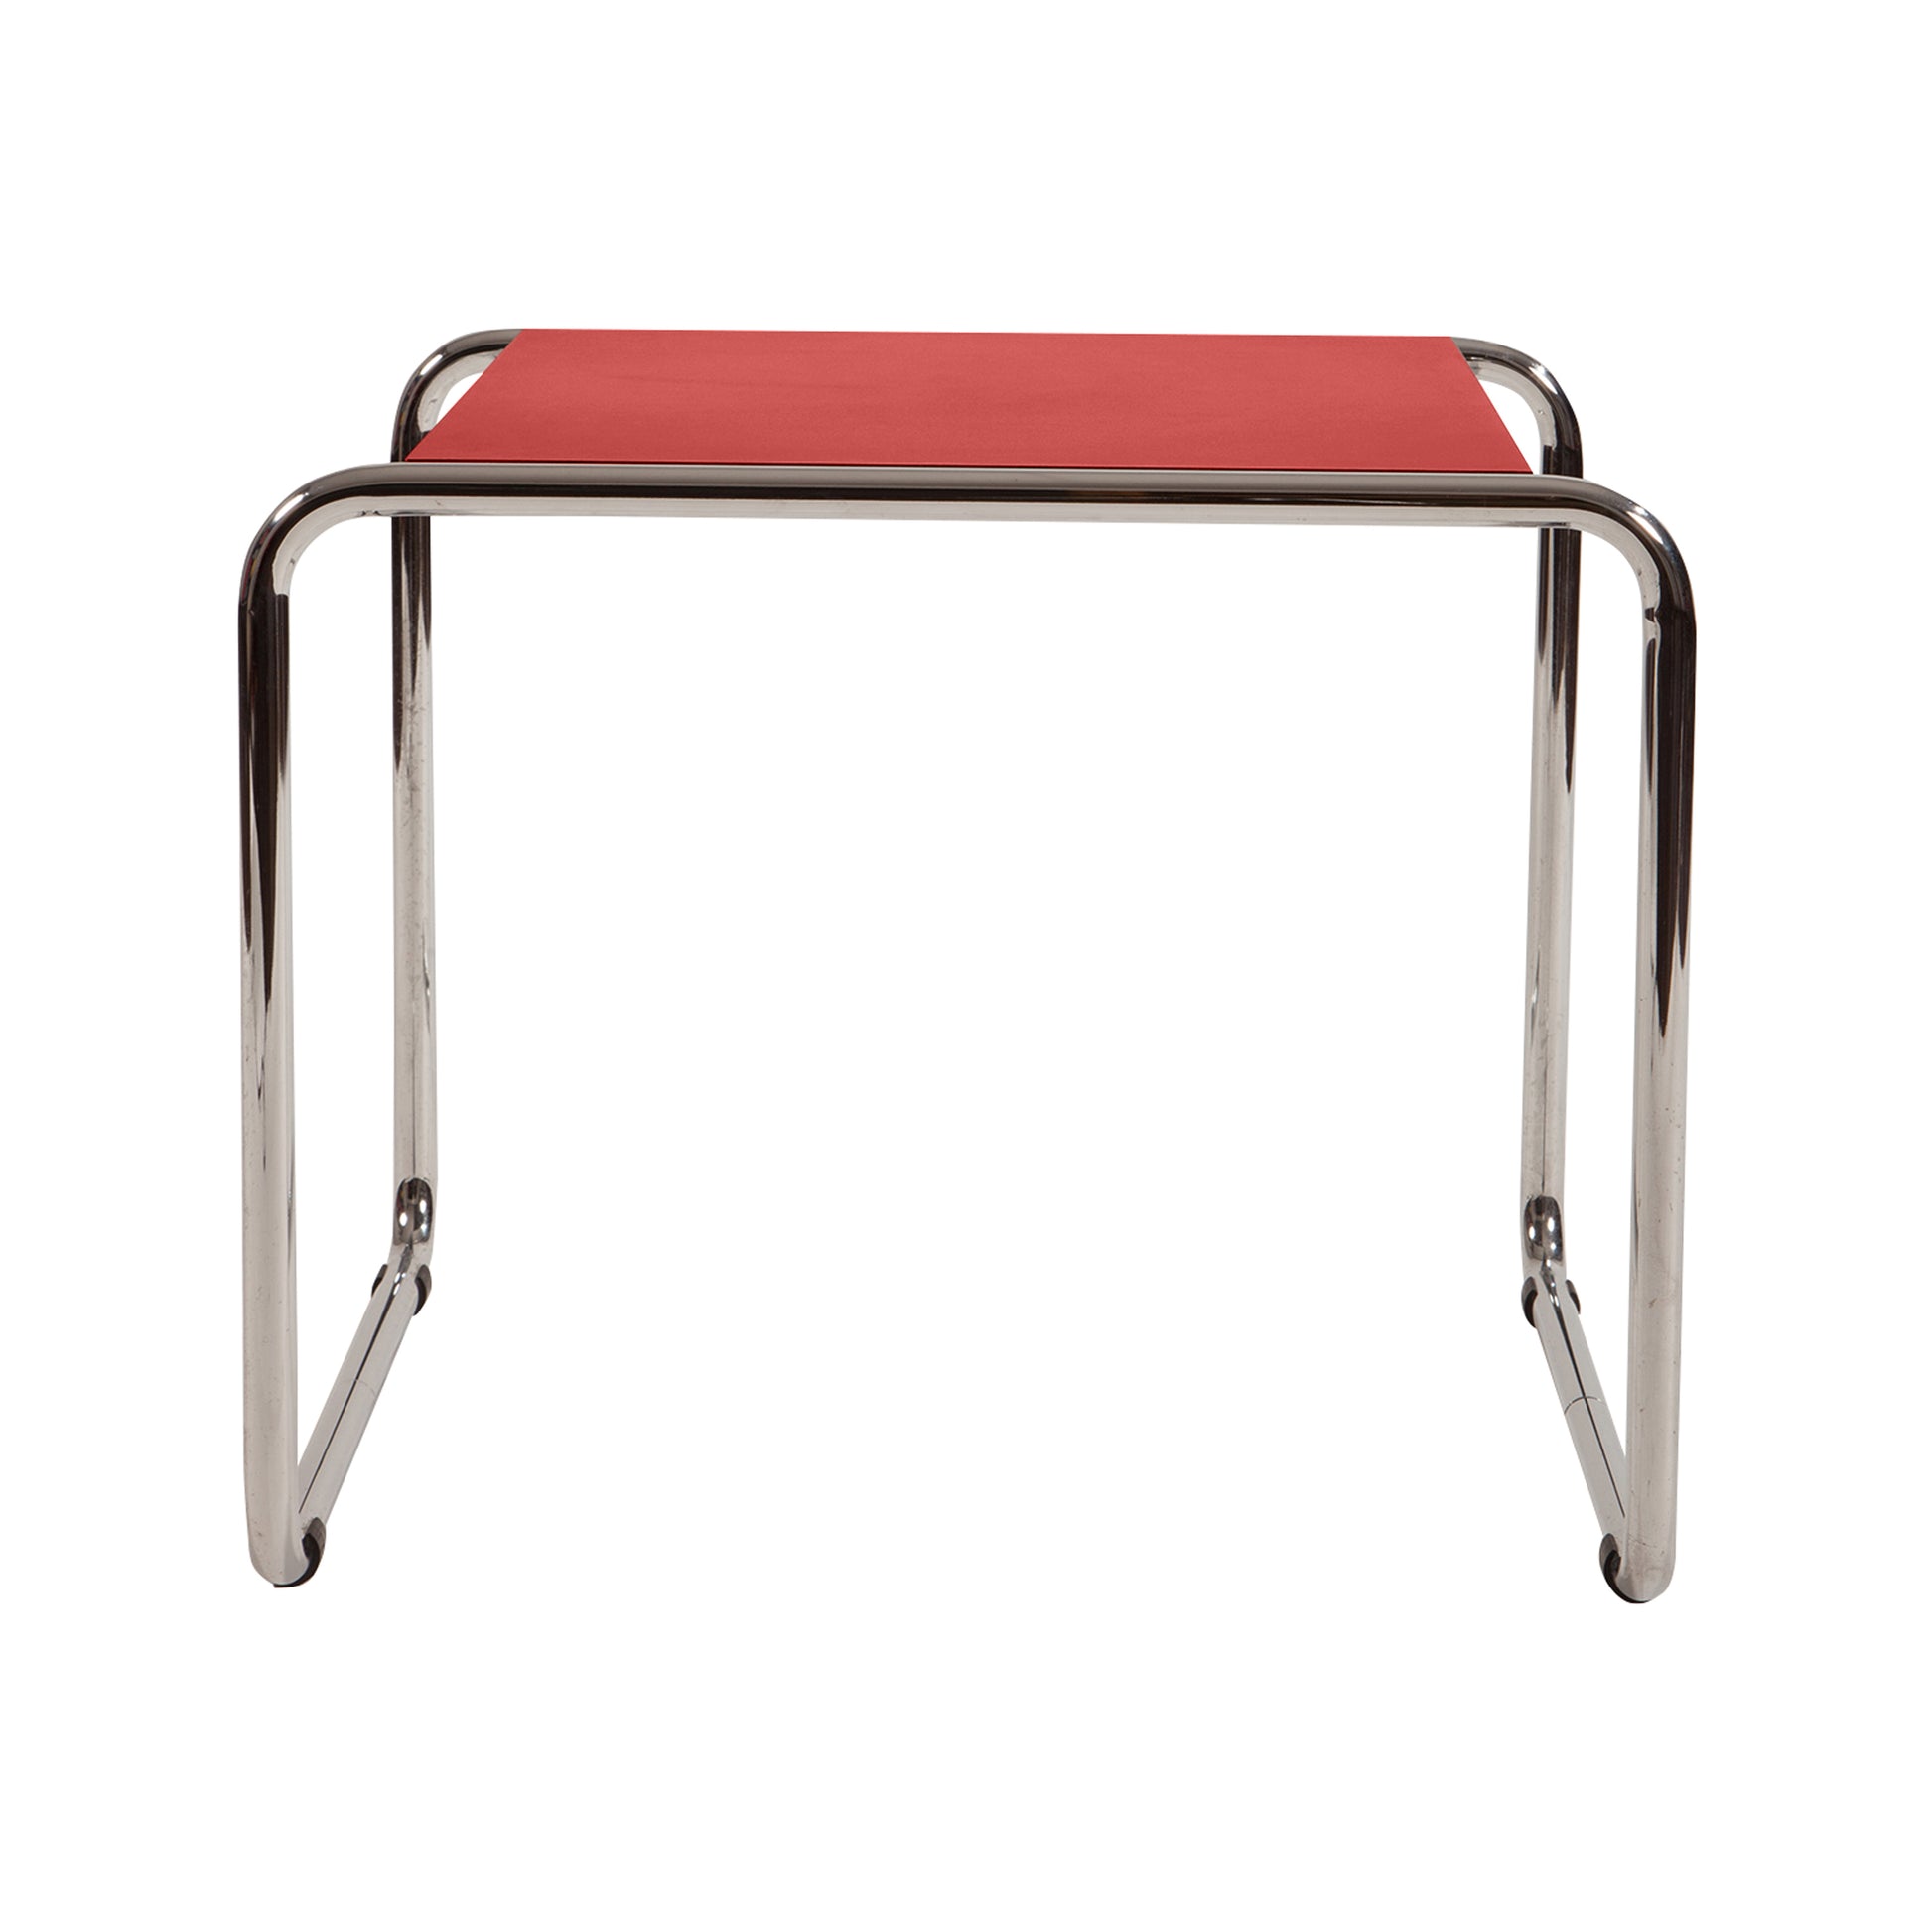 Laccio table style | Red | Side